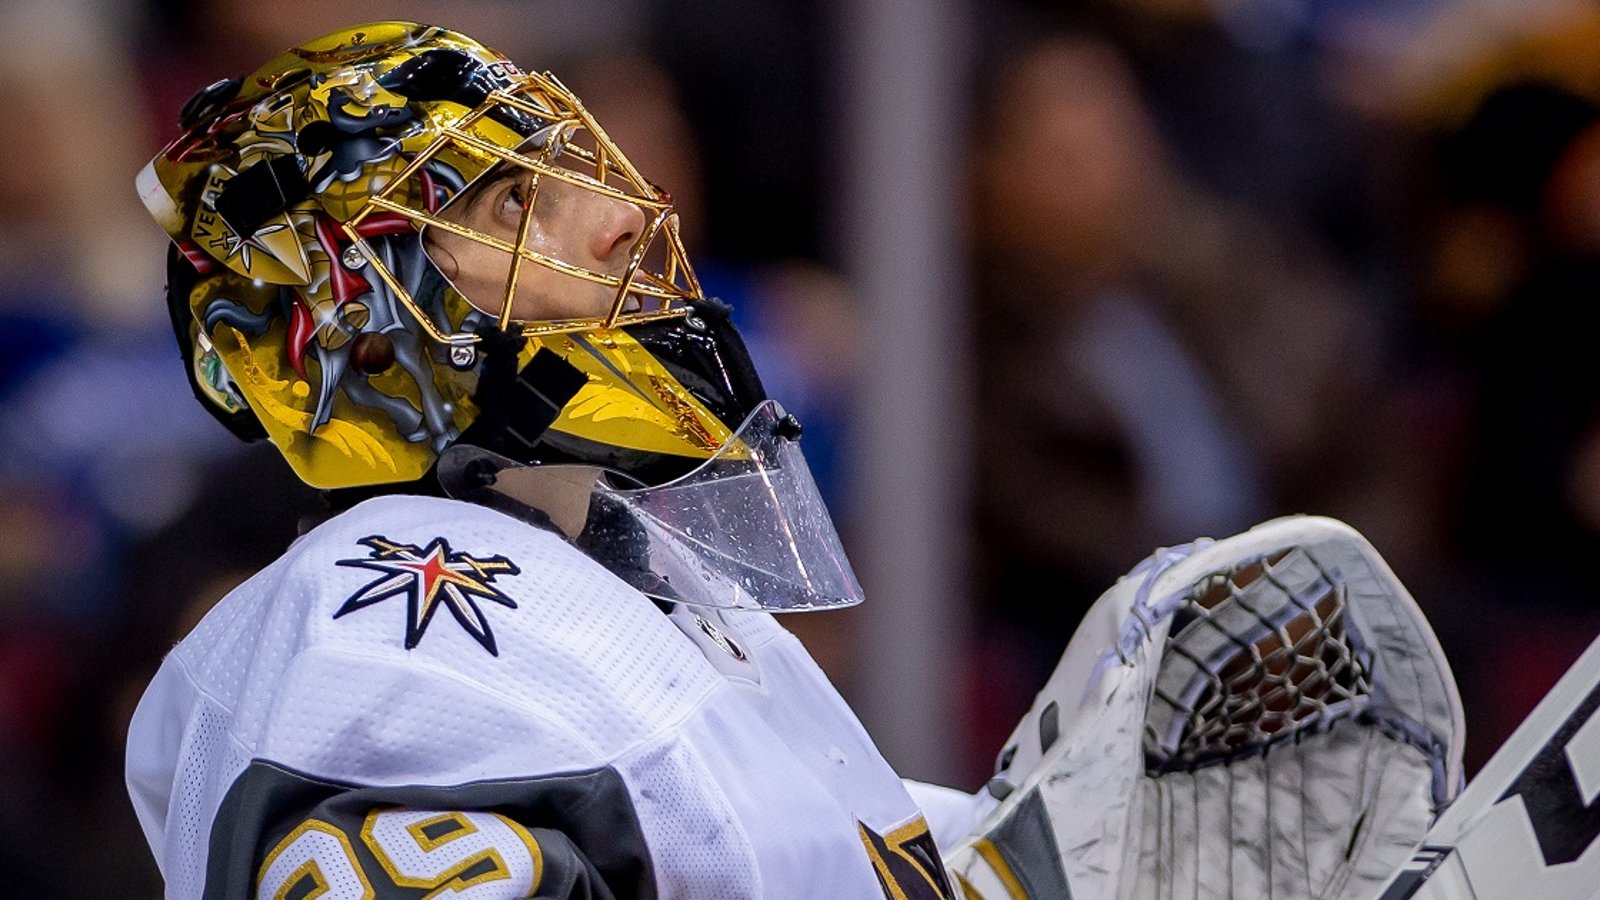 Marc Andre Fleury opens up about the loss of his father, Andre Fleury.